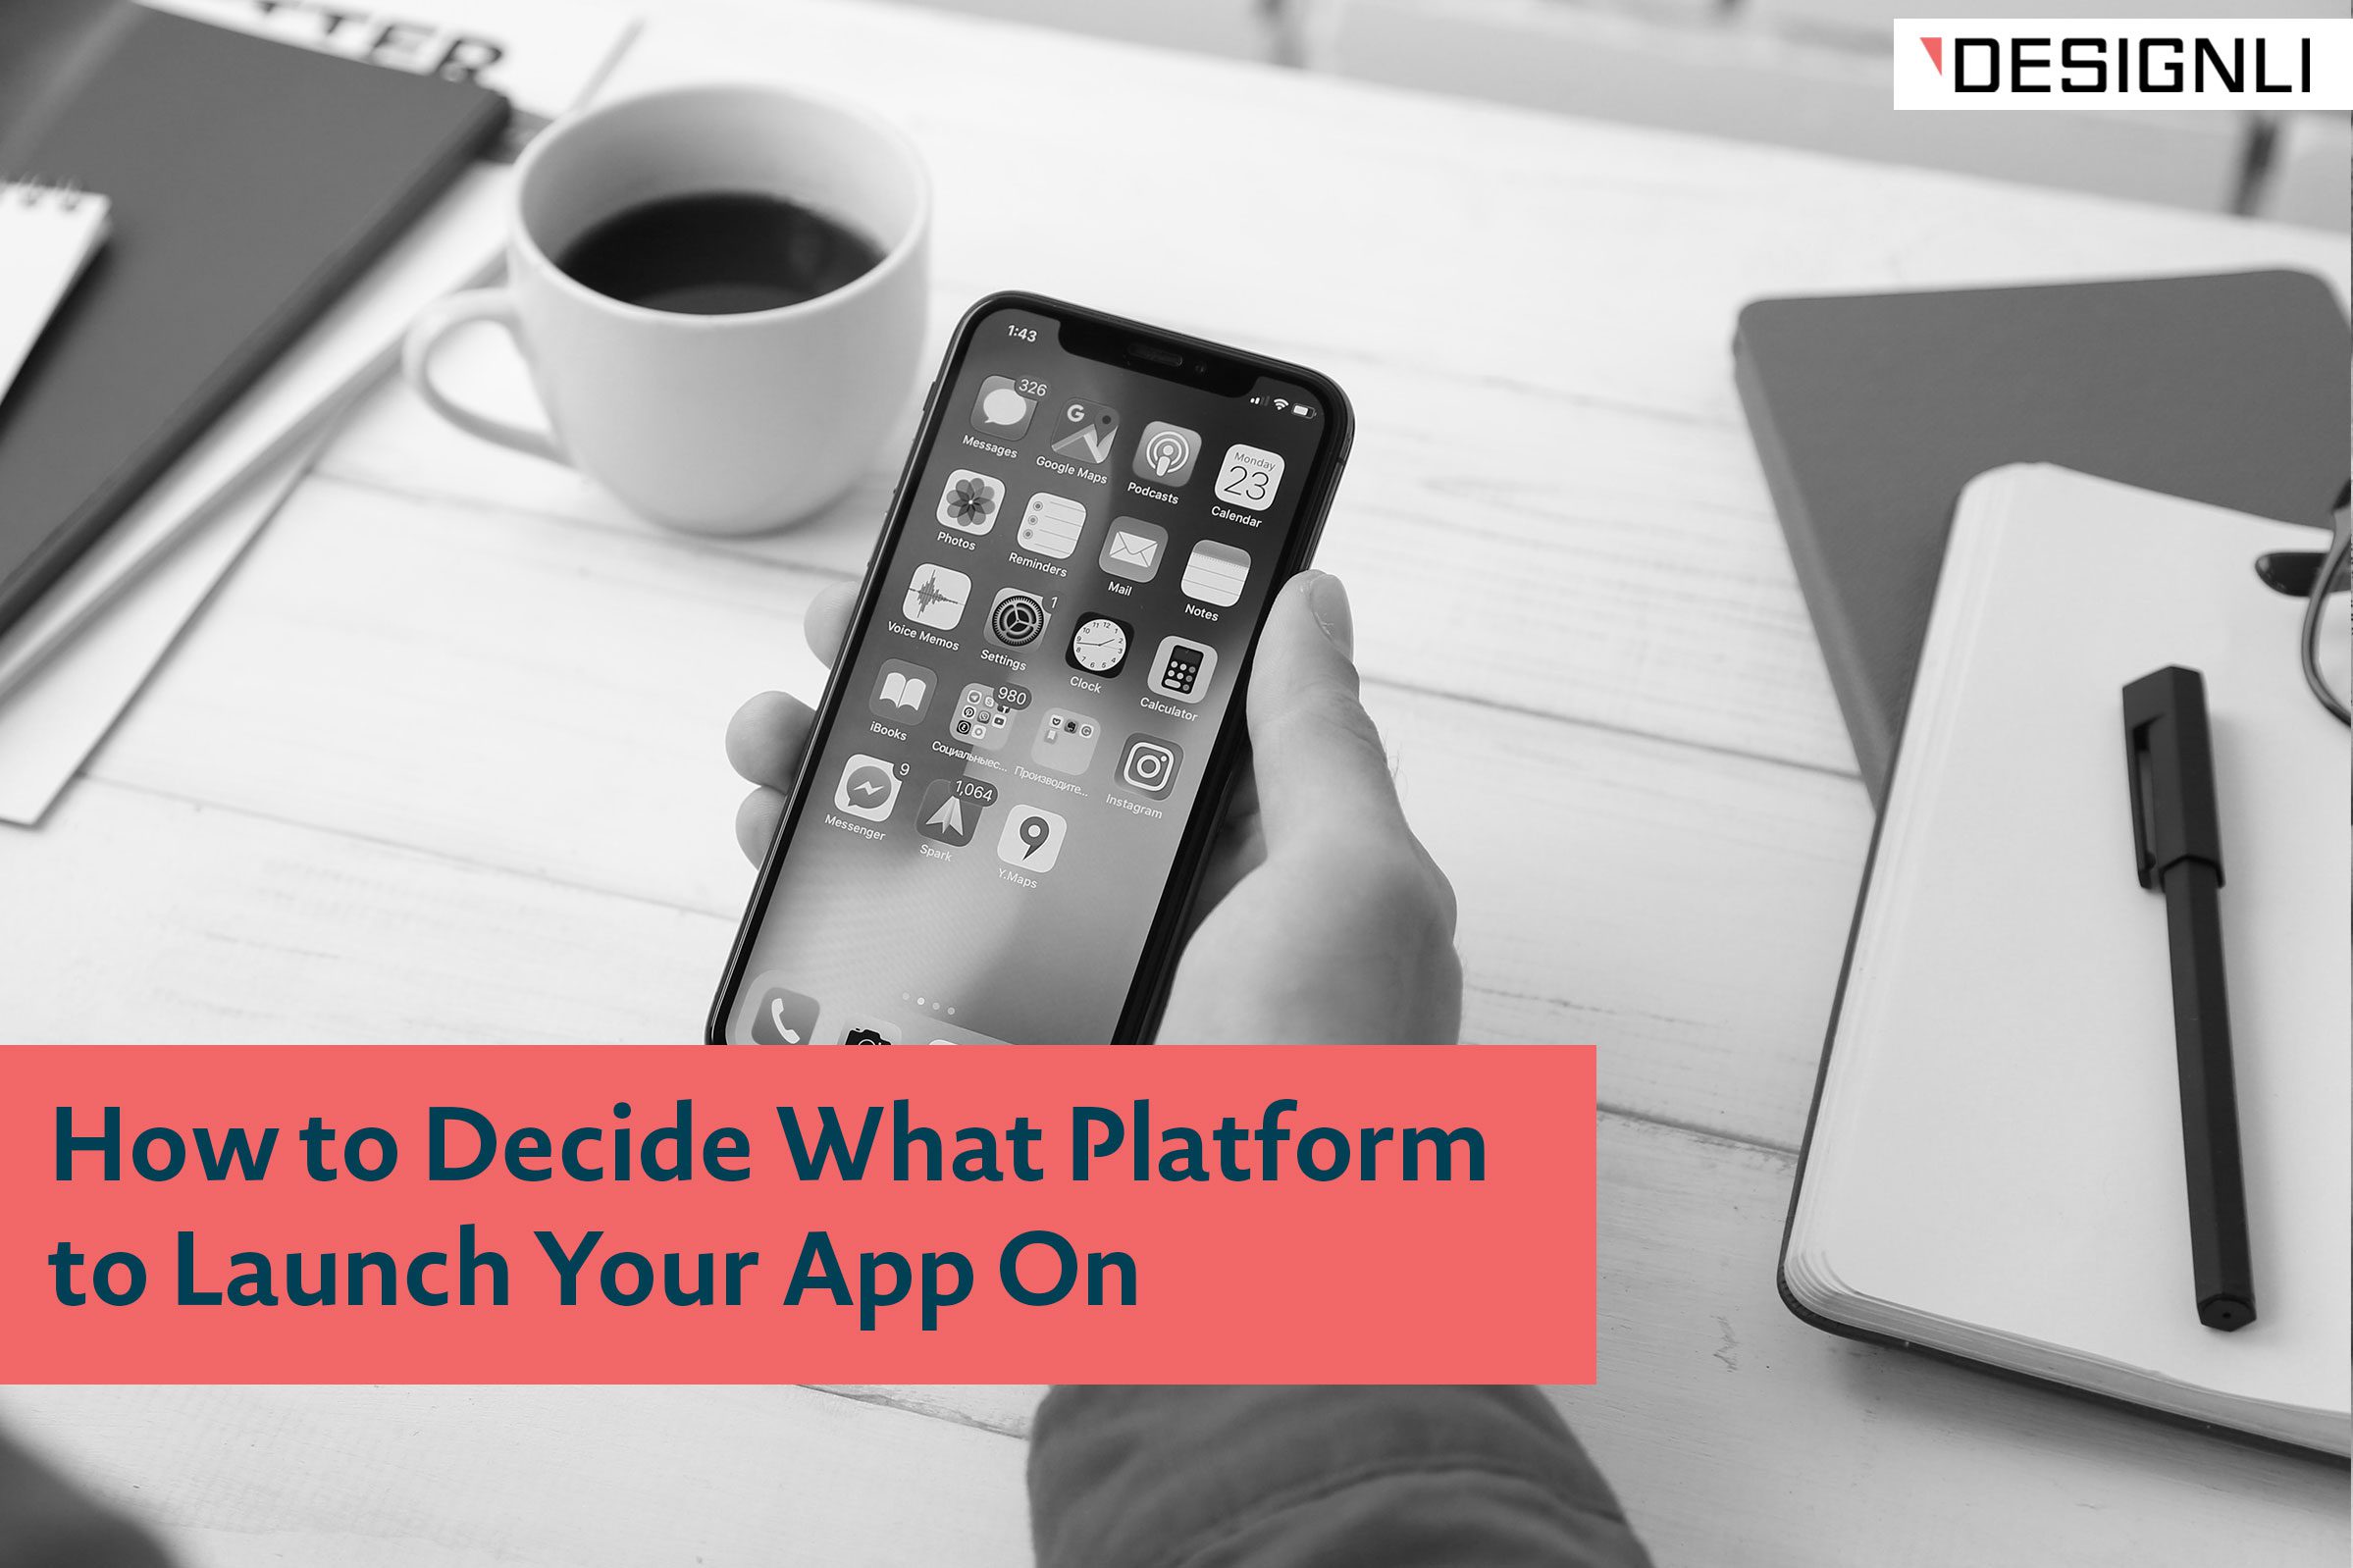 How to Decide What Platform to Launch Your App On